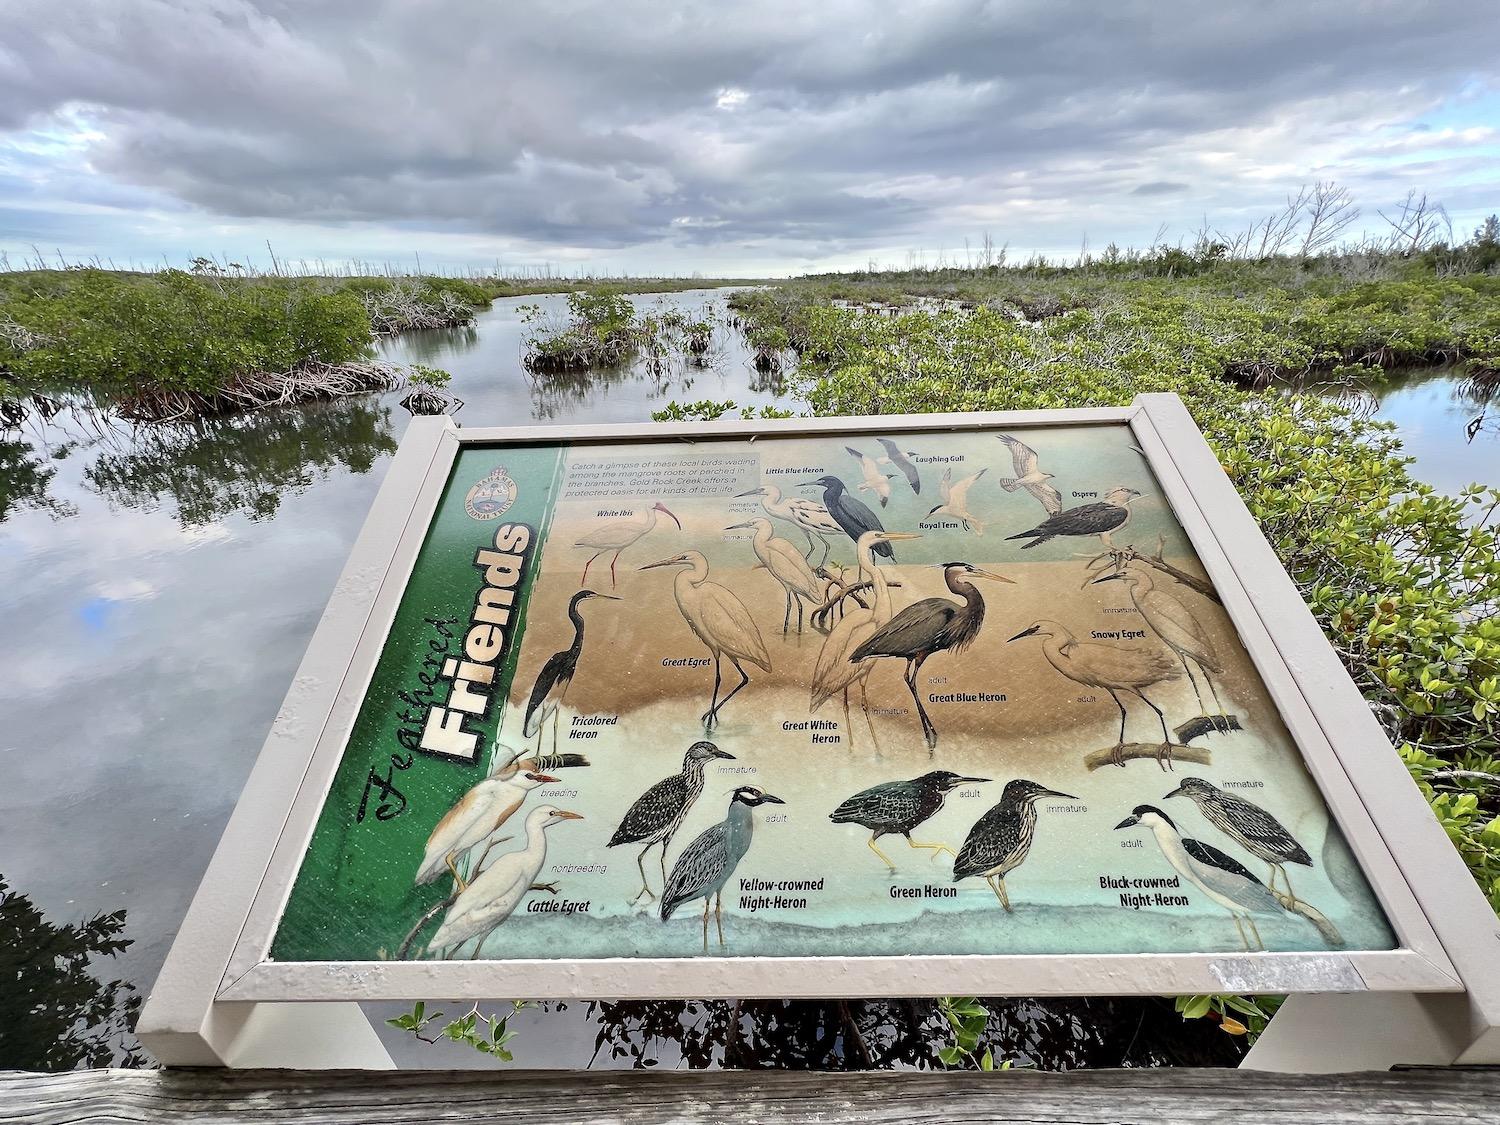 A vintage sign details bird life in Gold Rock Creek in Lucayan National Park.